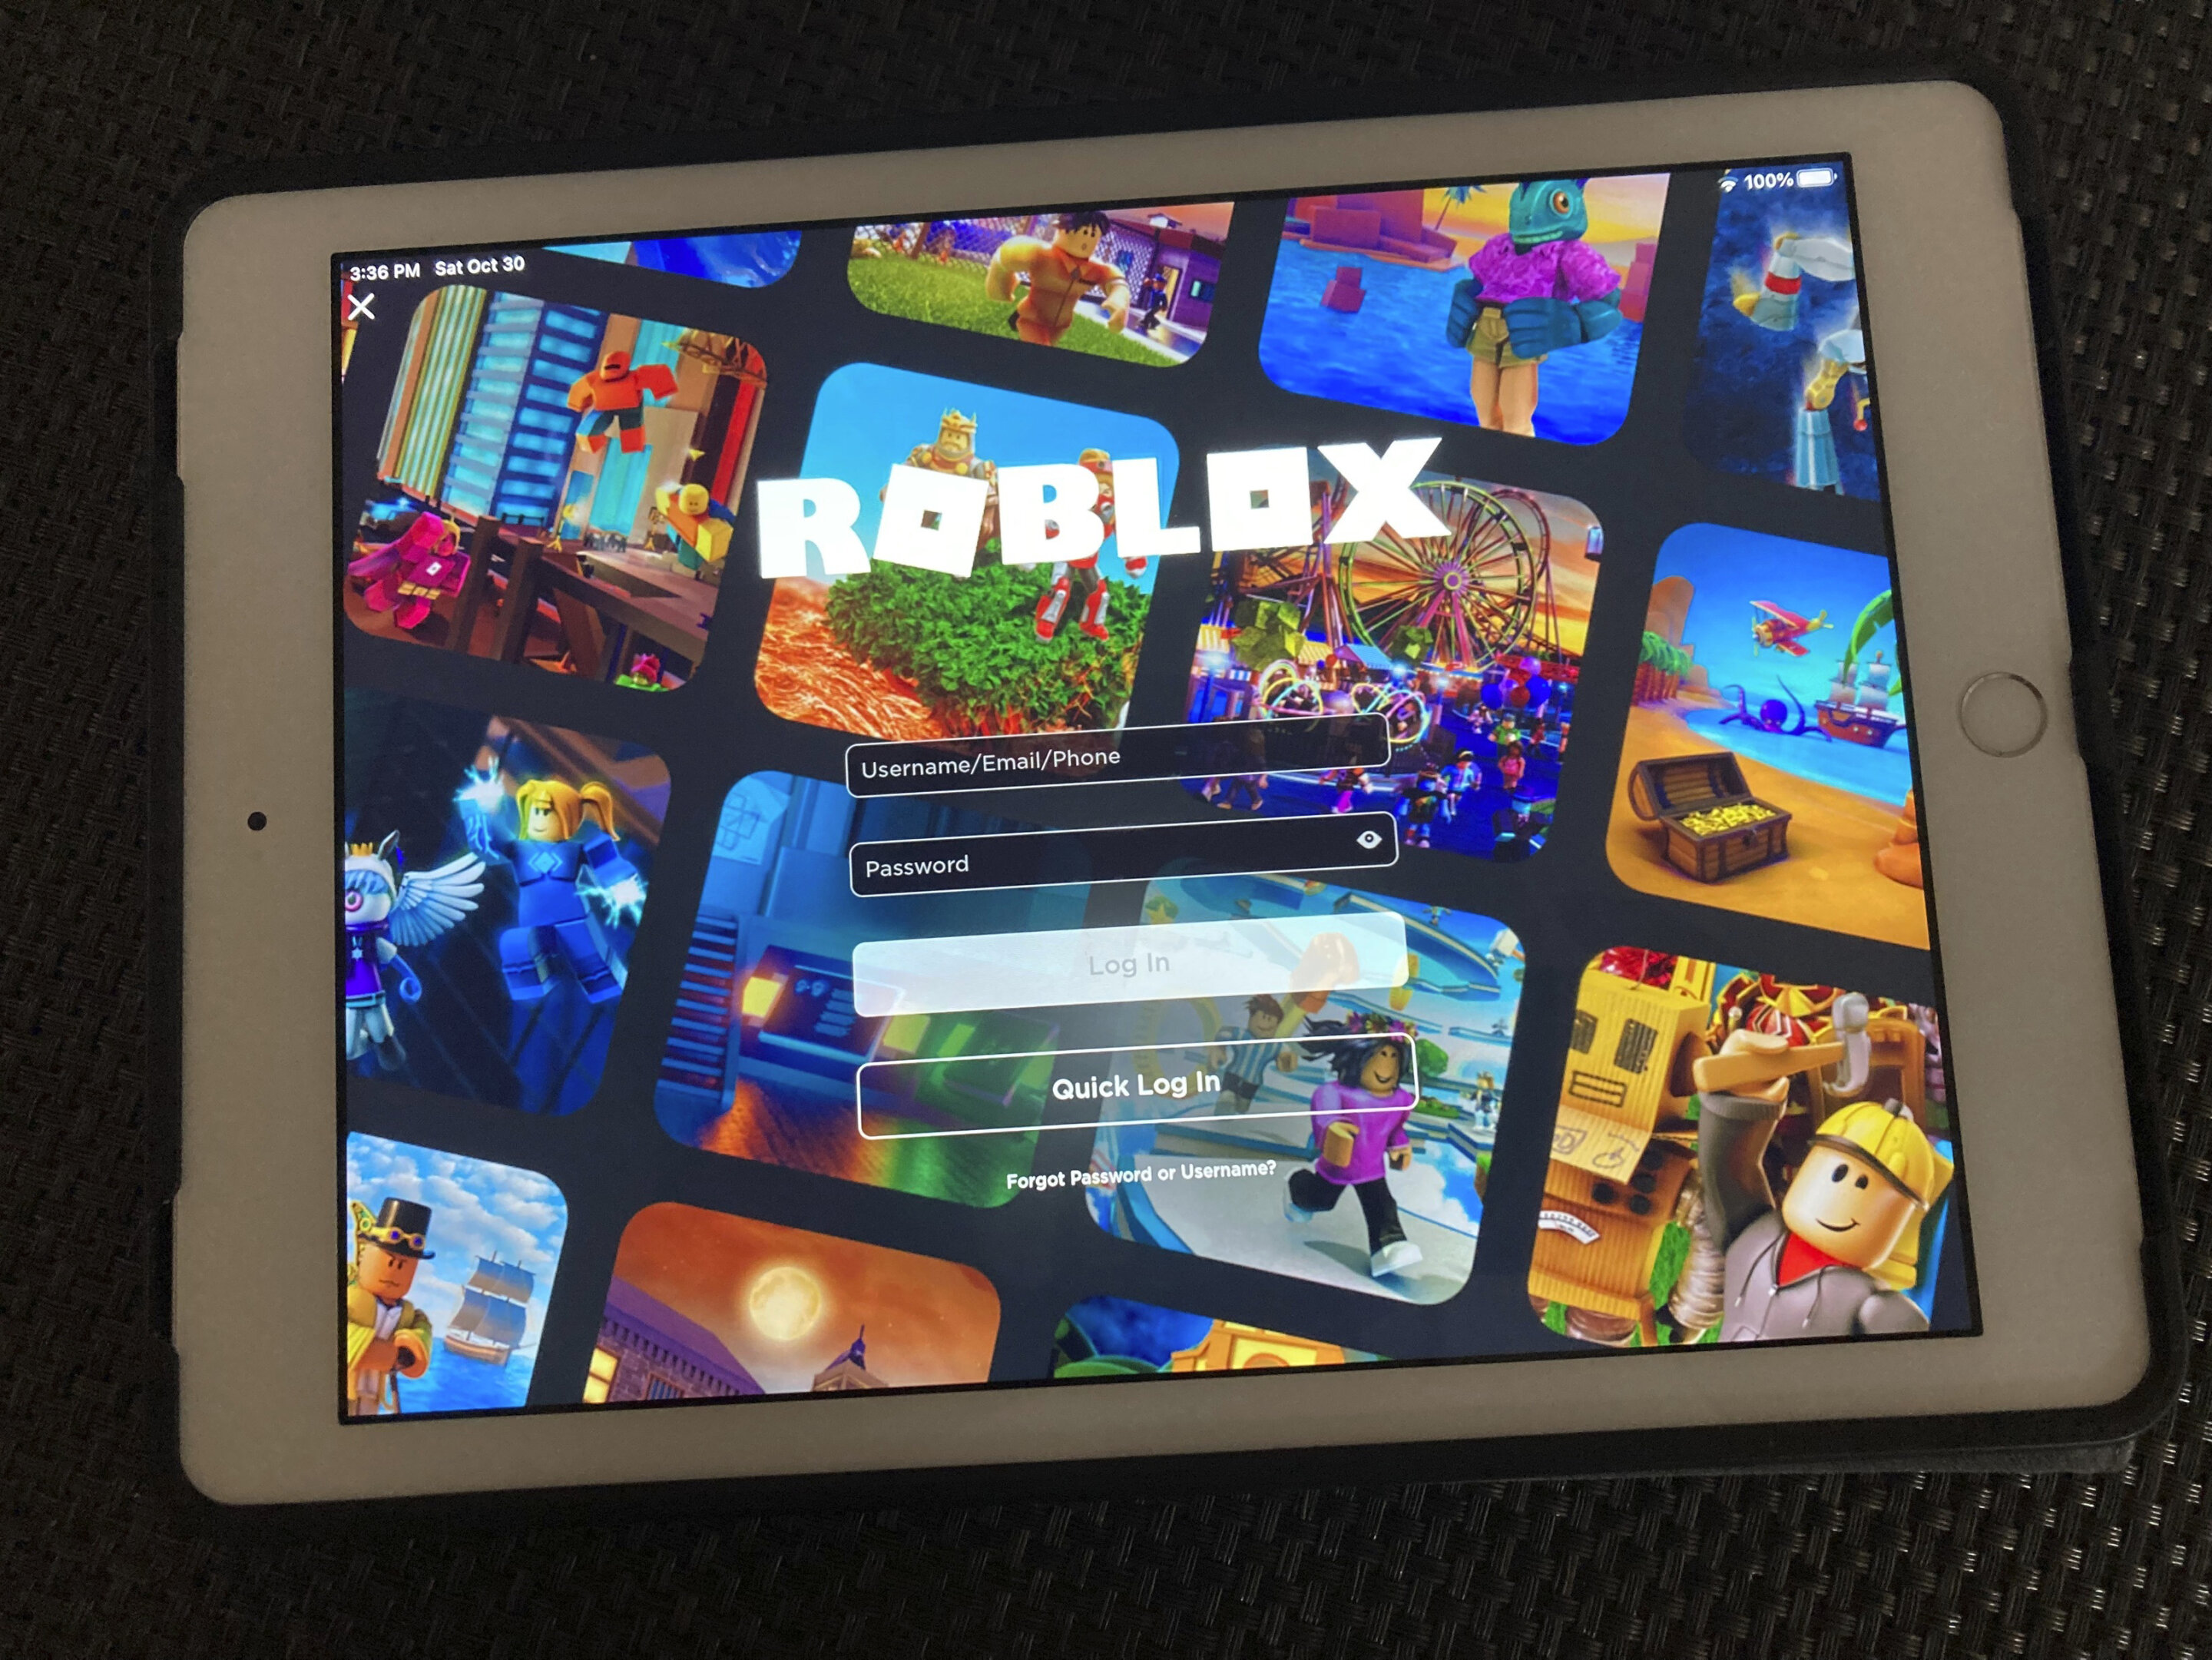 Roblox hacks service挂代刷, Video Gaming, Gaming Accessories, In